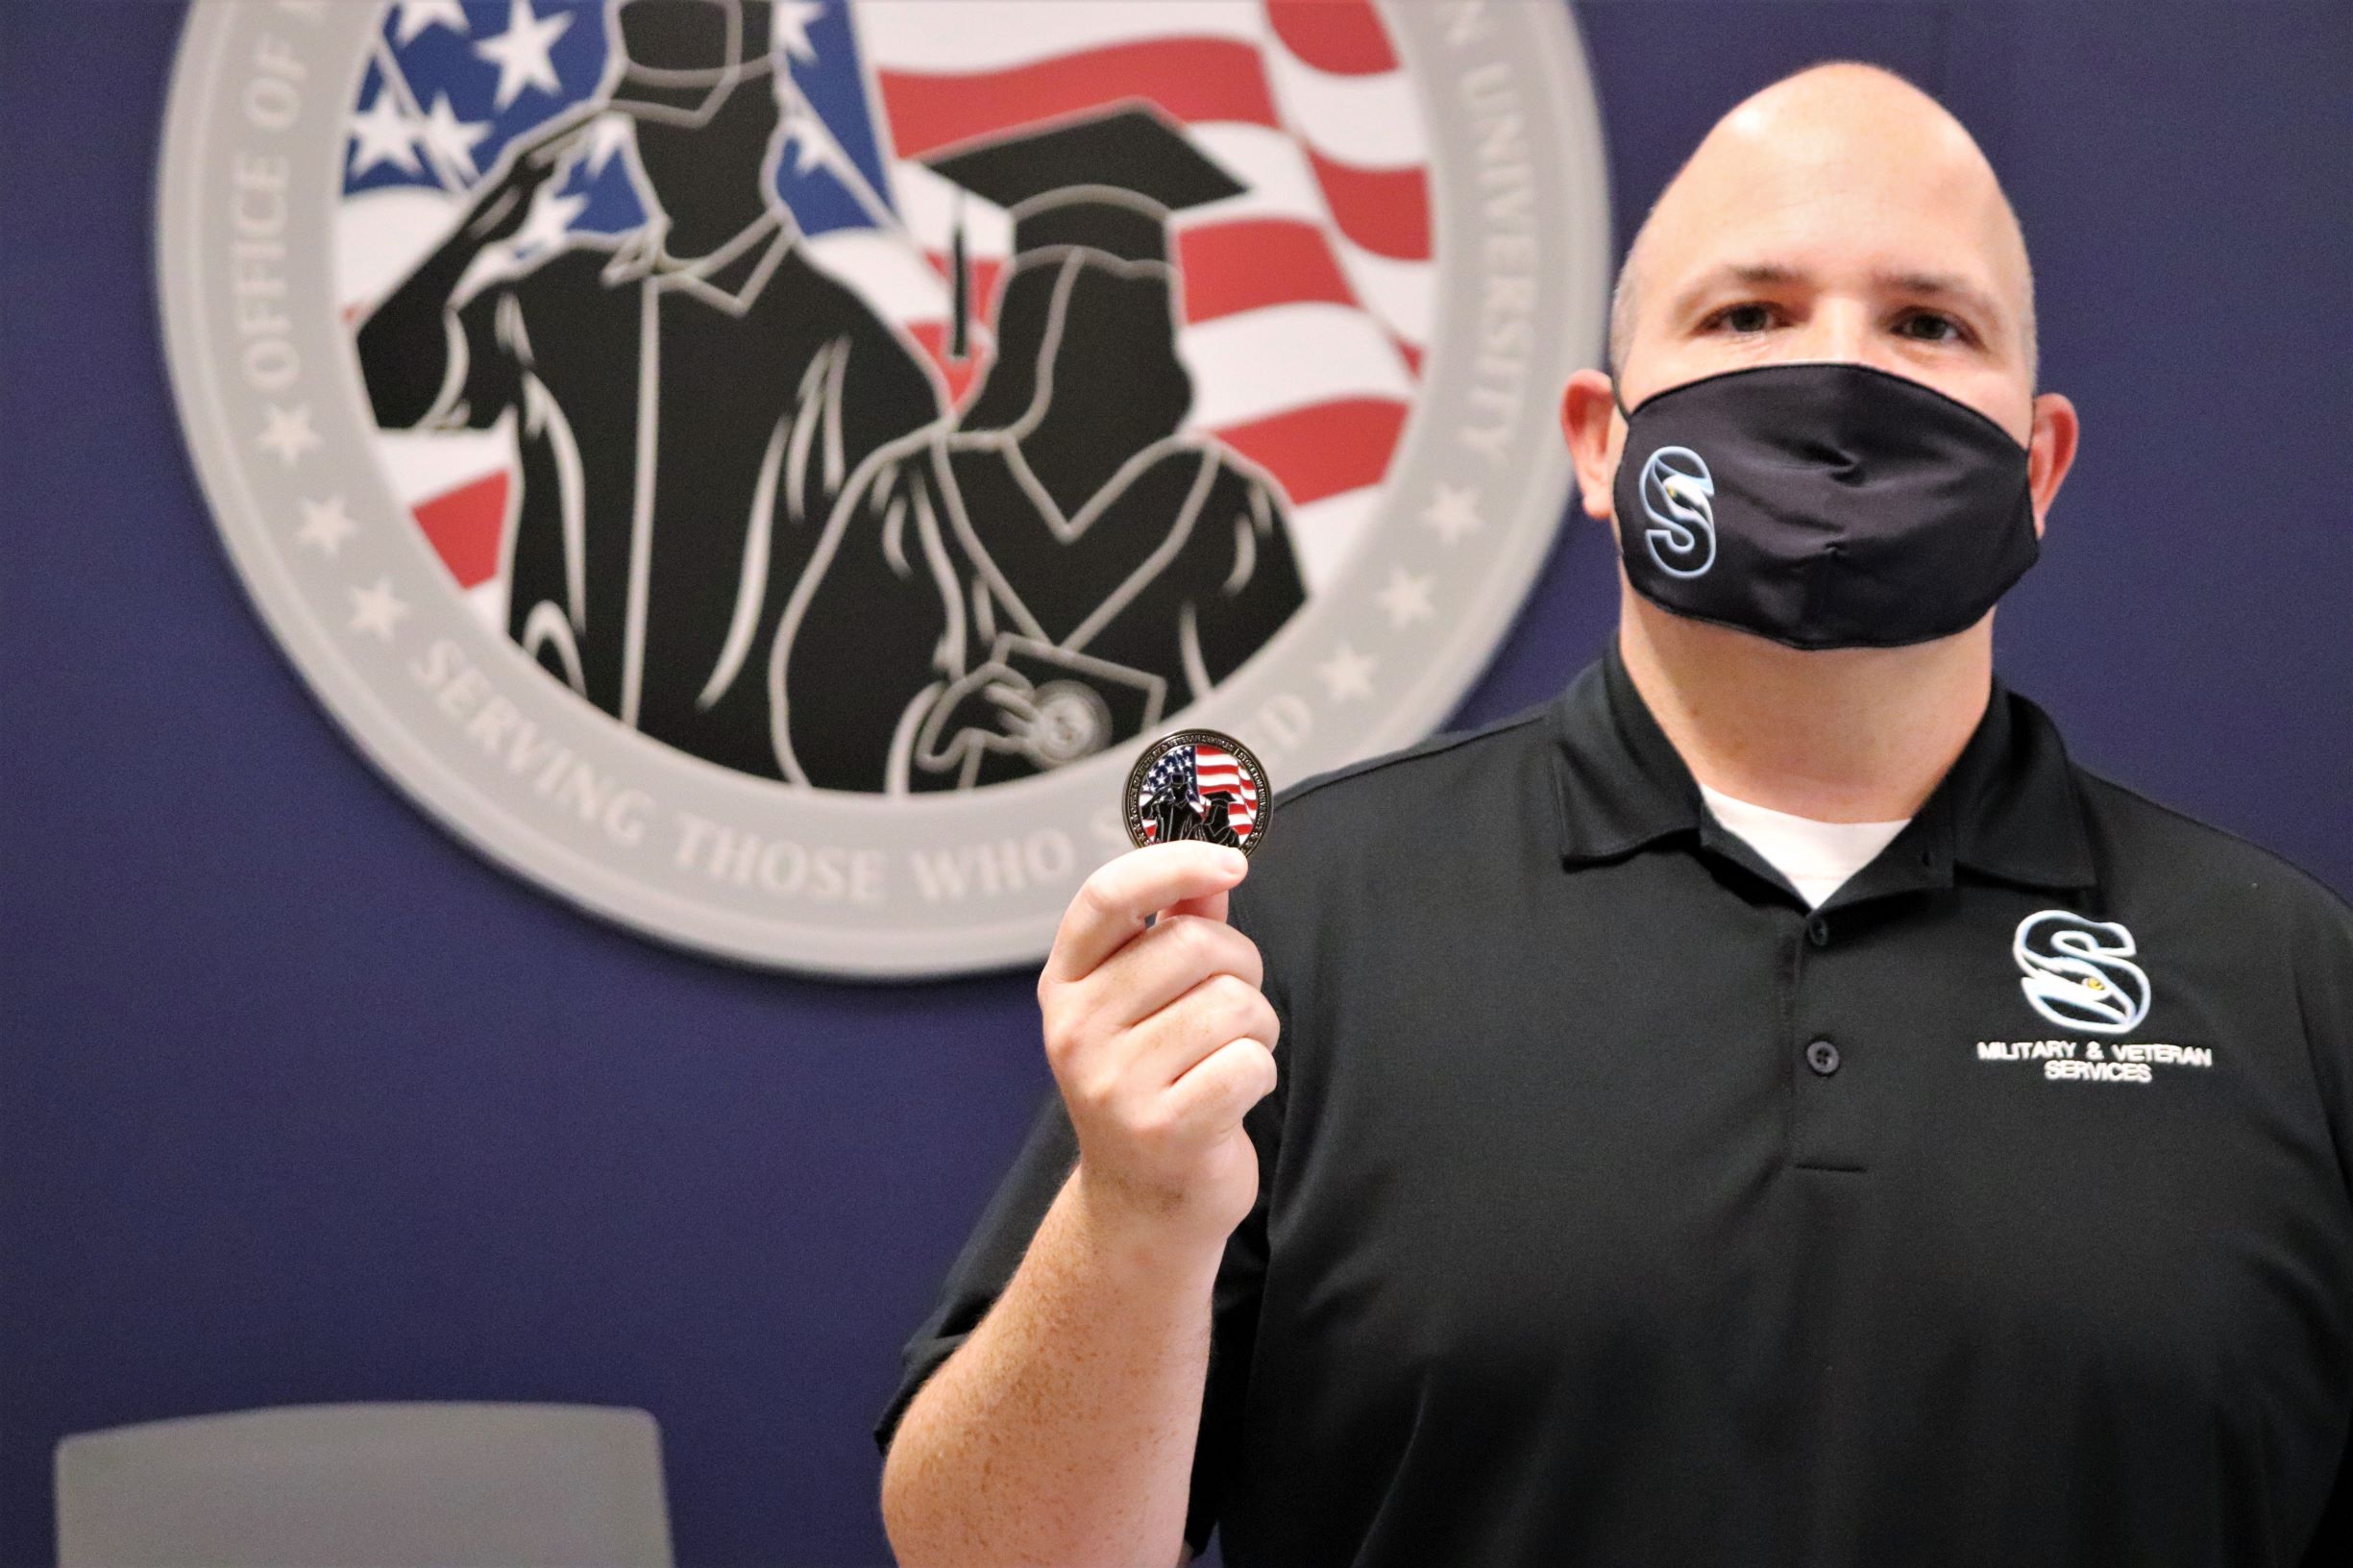 Director of the Office of Military and Veteran Services Jason Babin holds a Stockton challenge coin.